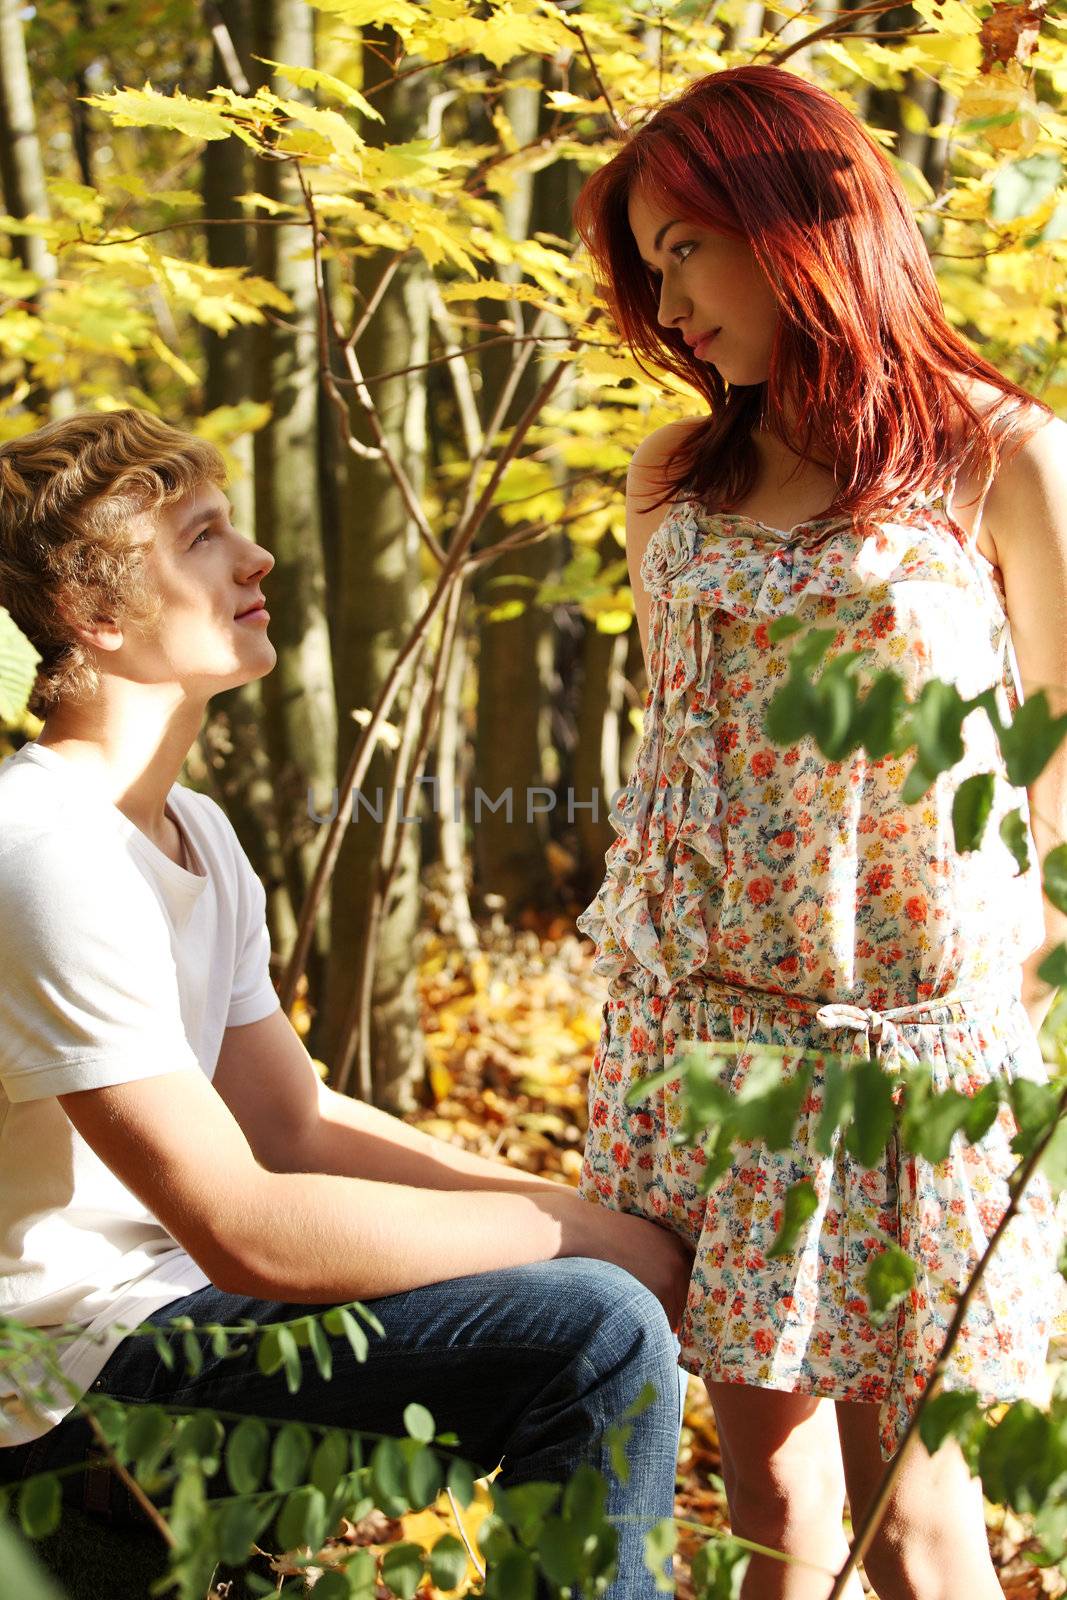 Handsome caucasian boy sitting down with girl standing and looking in his eyes.